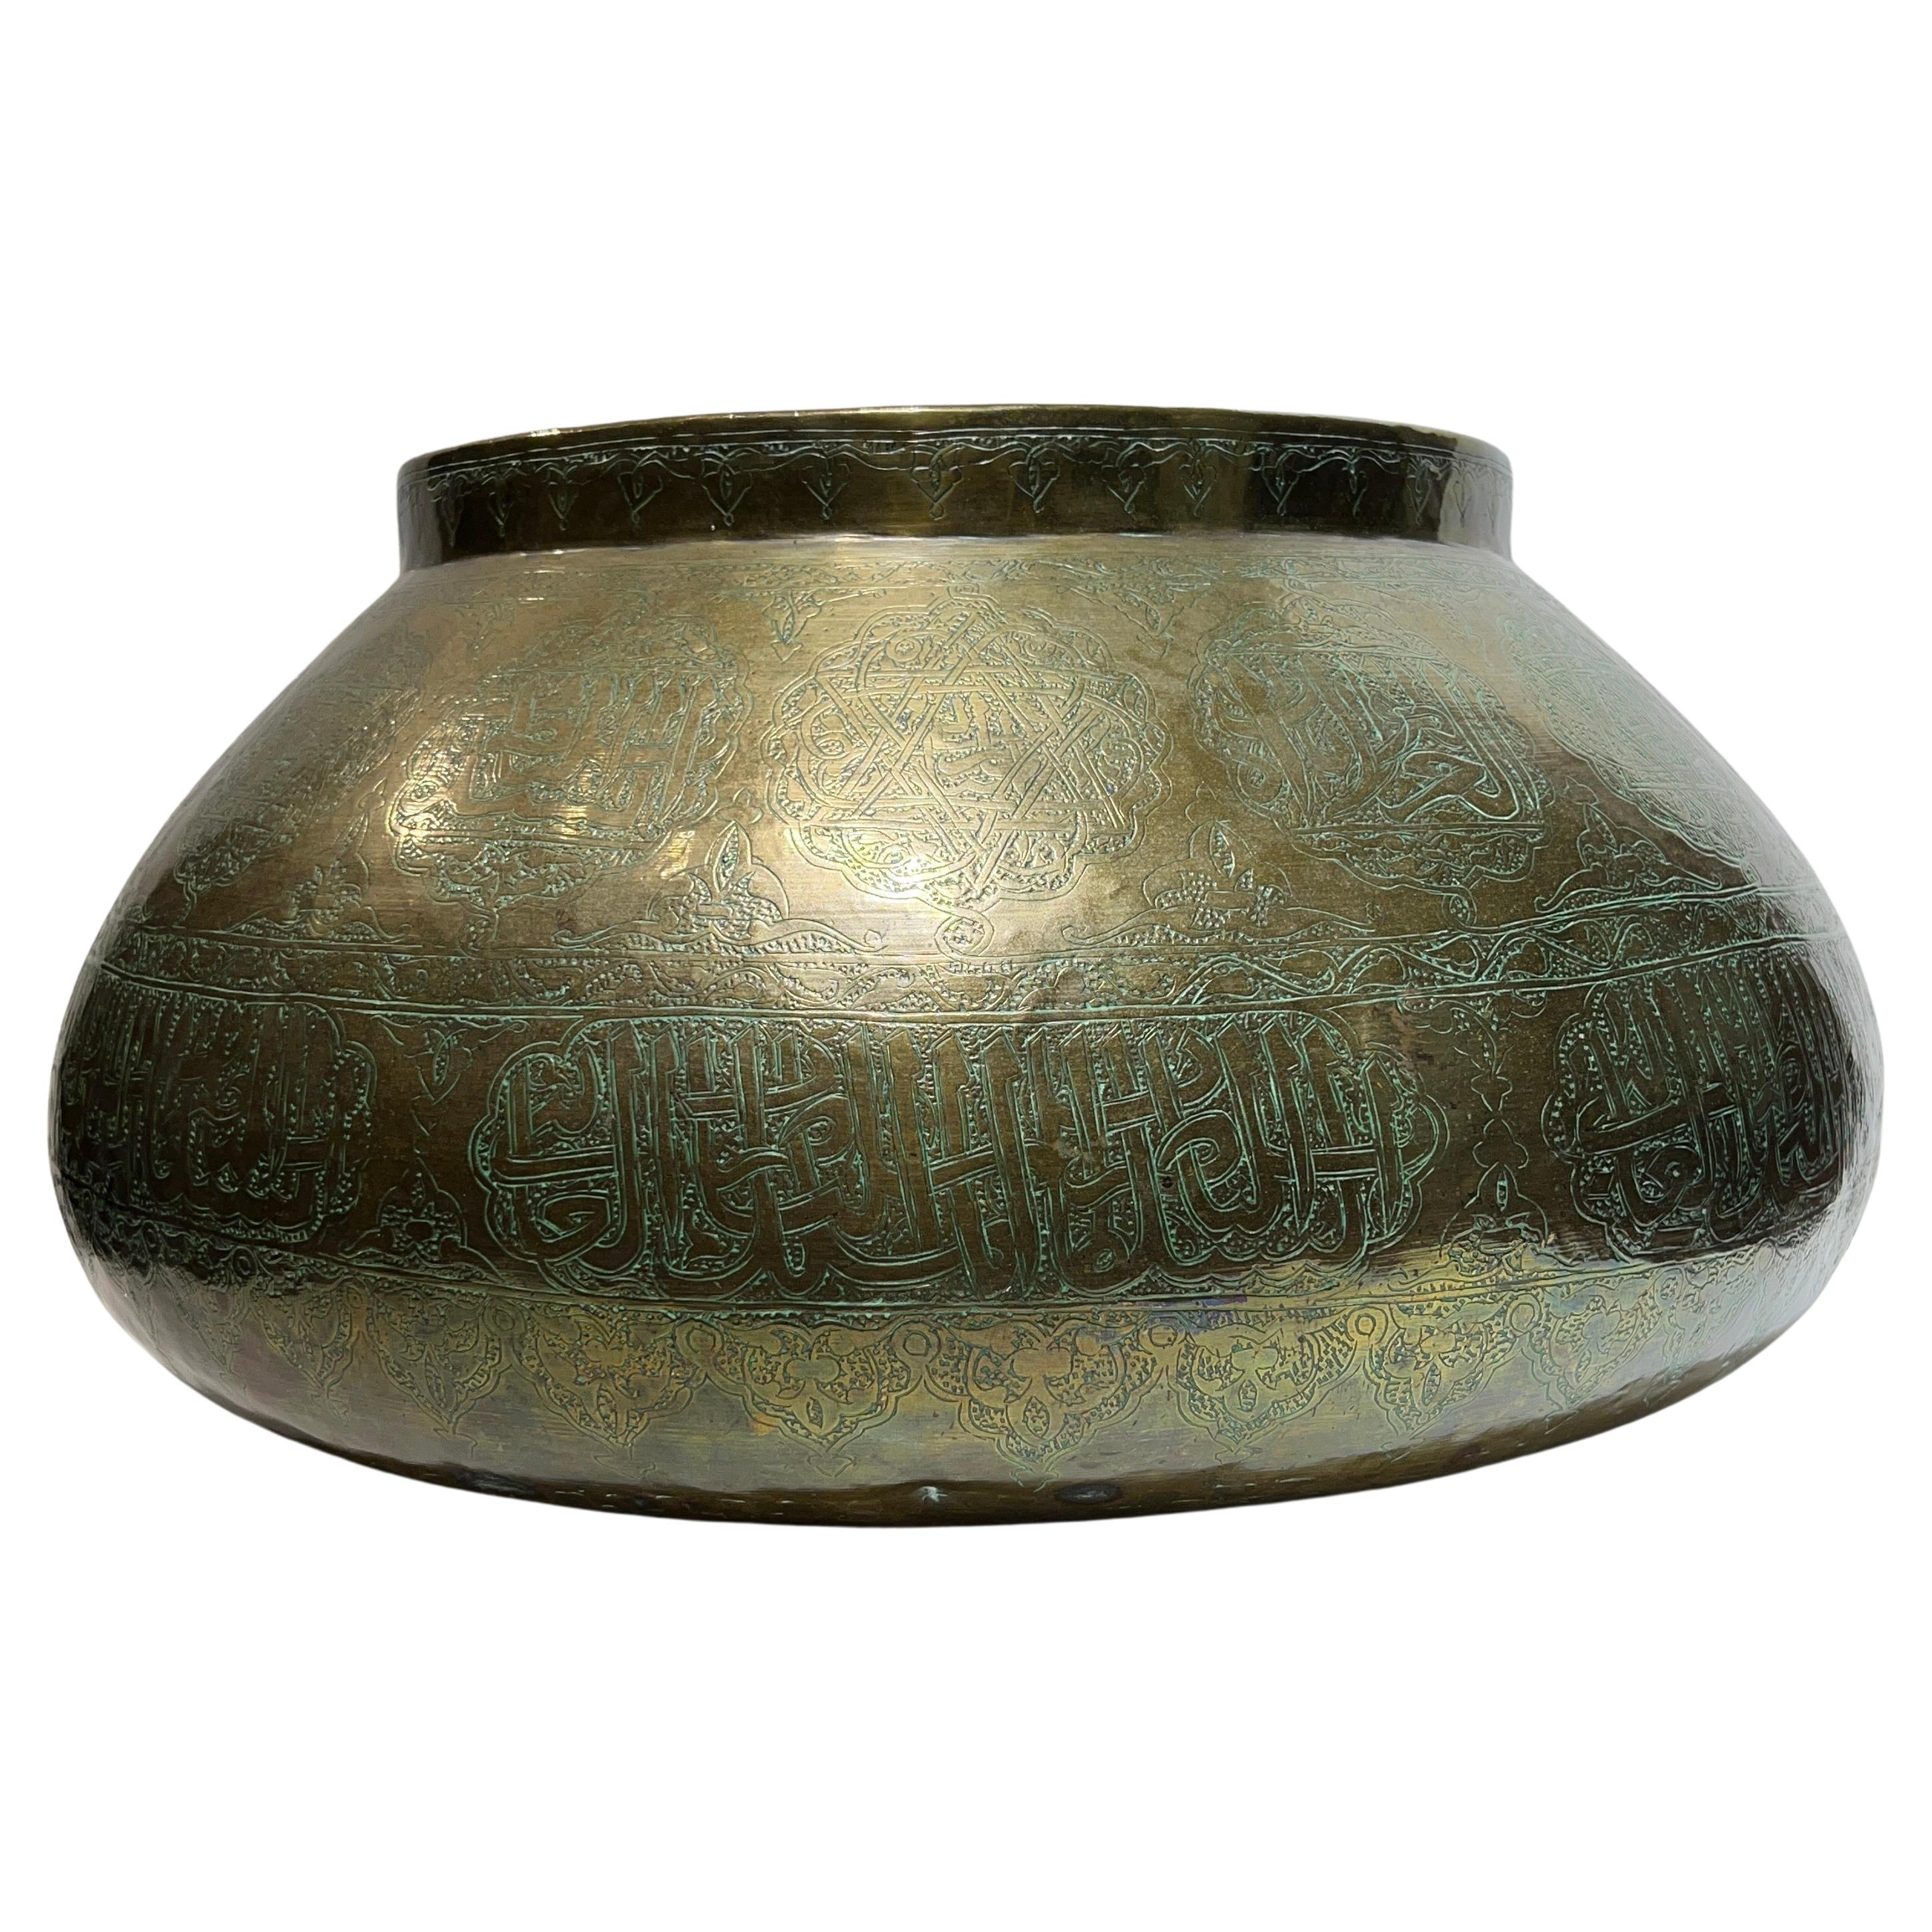 Large 19th Century Islamic Middle Eastern Engraved Brass Centerpiece Bowl For Sale